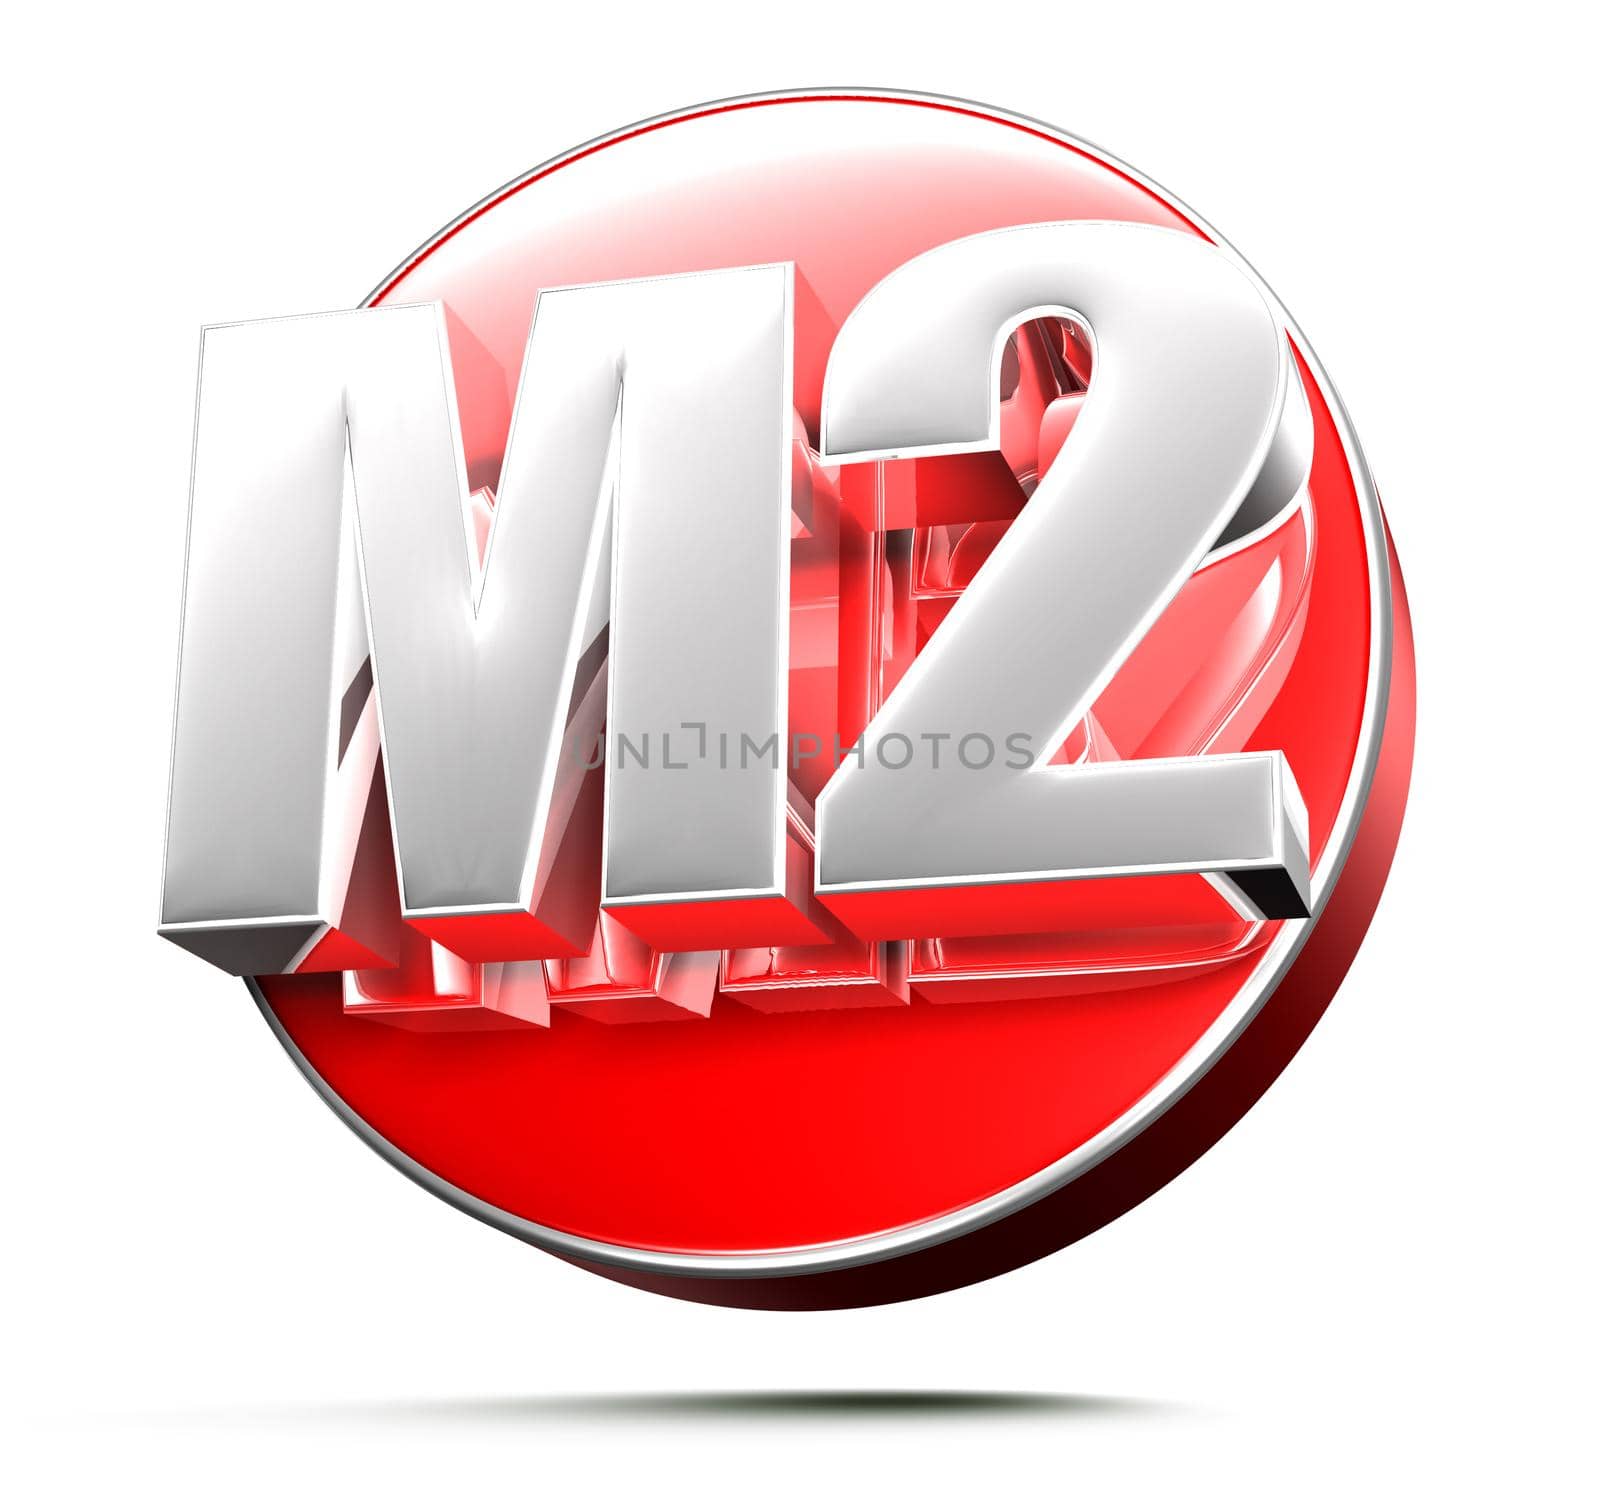 M2 red 3D illustration on white background with clipping path.